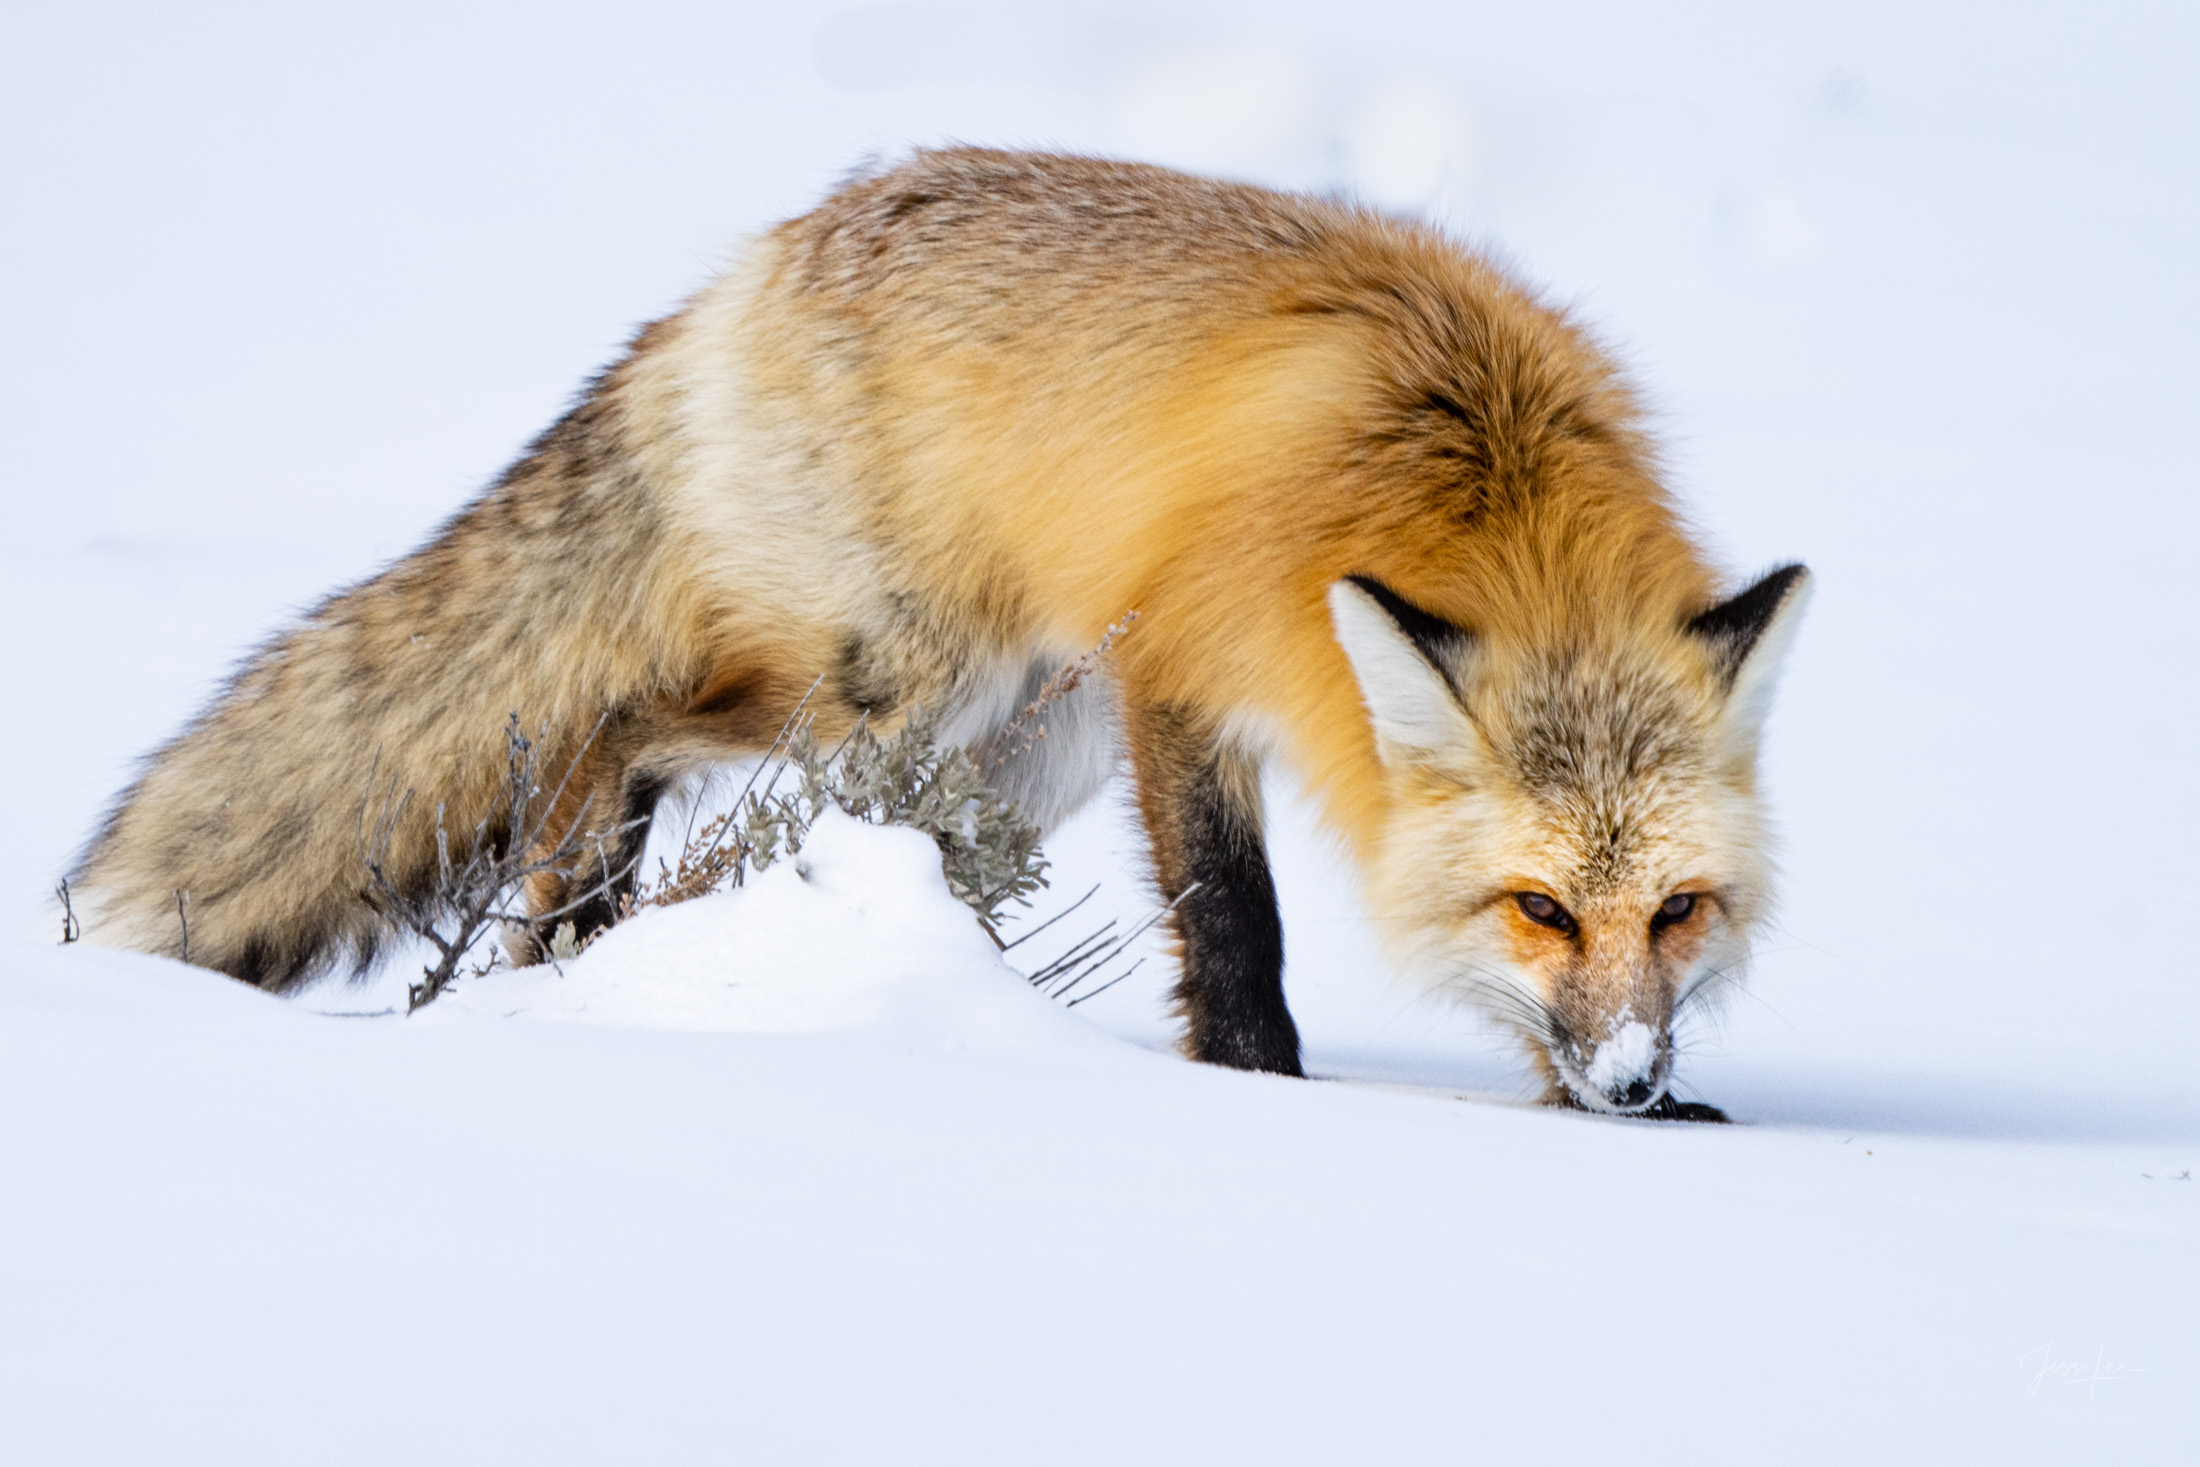 Fox Photo 13 is presented in Limited Edition of 250 Exclusive high-resolution Museum Quality Fine Art Prints. Wildlife Photo...